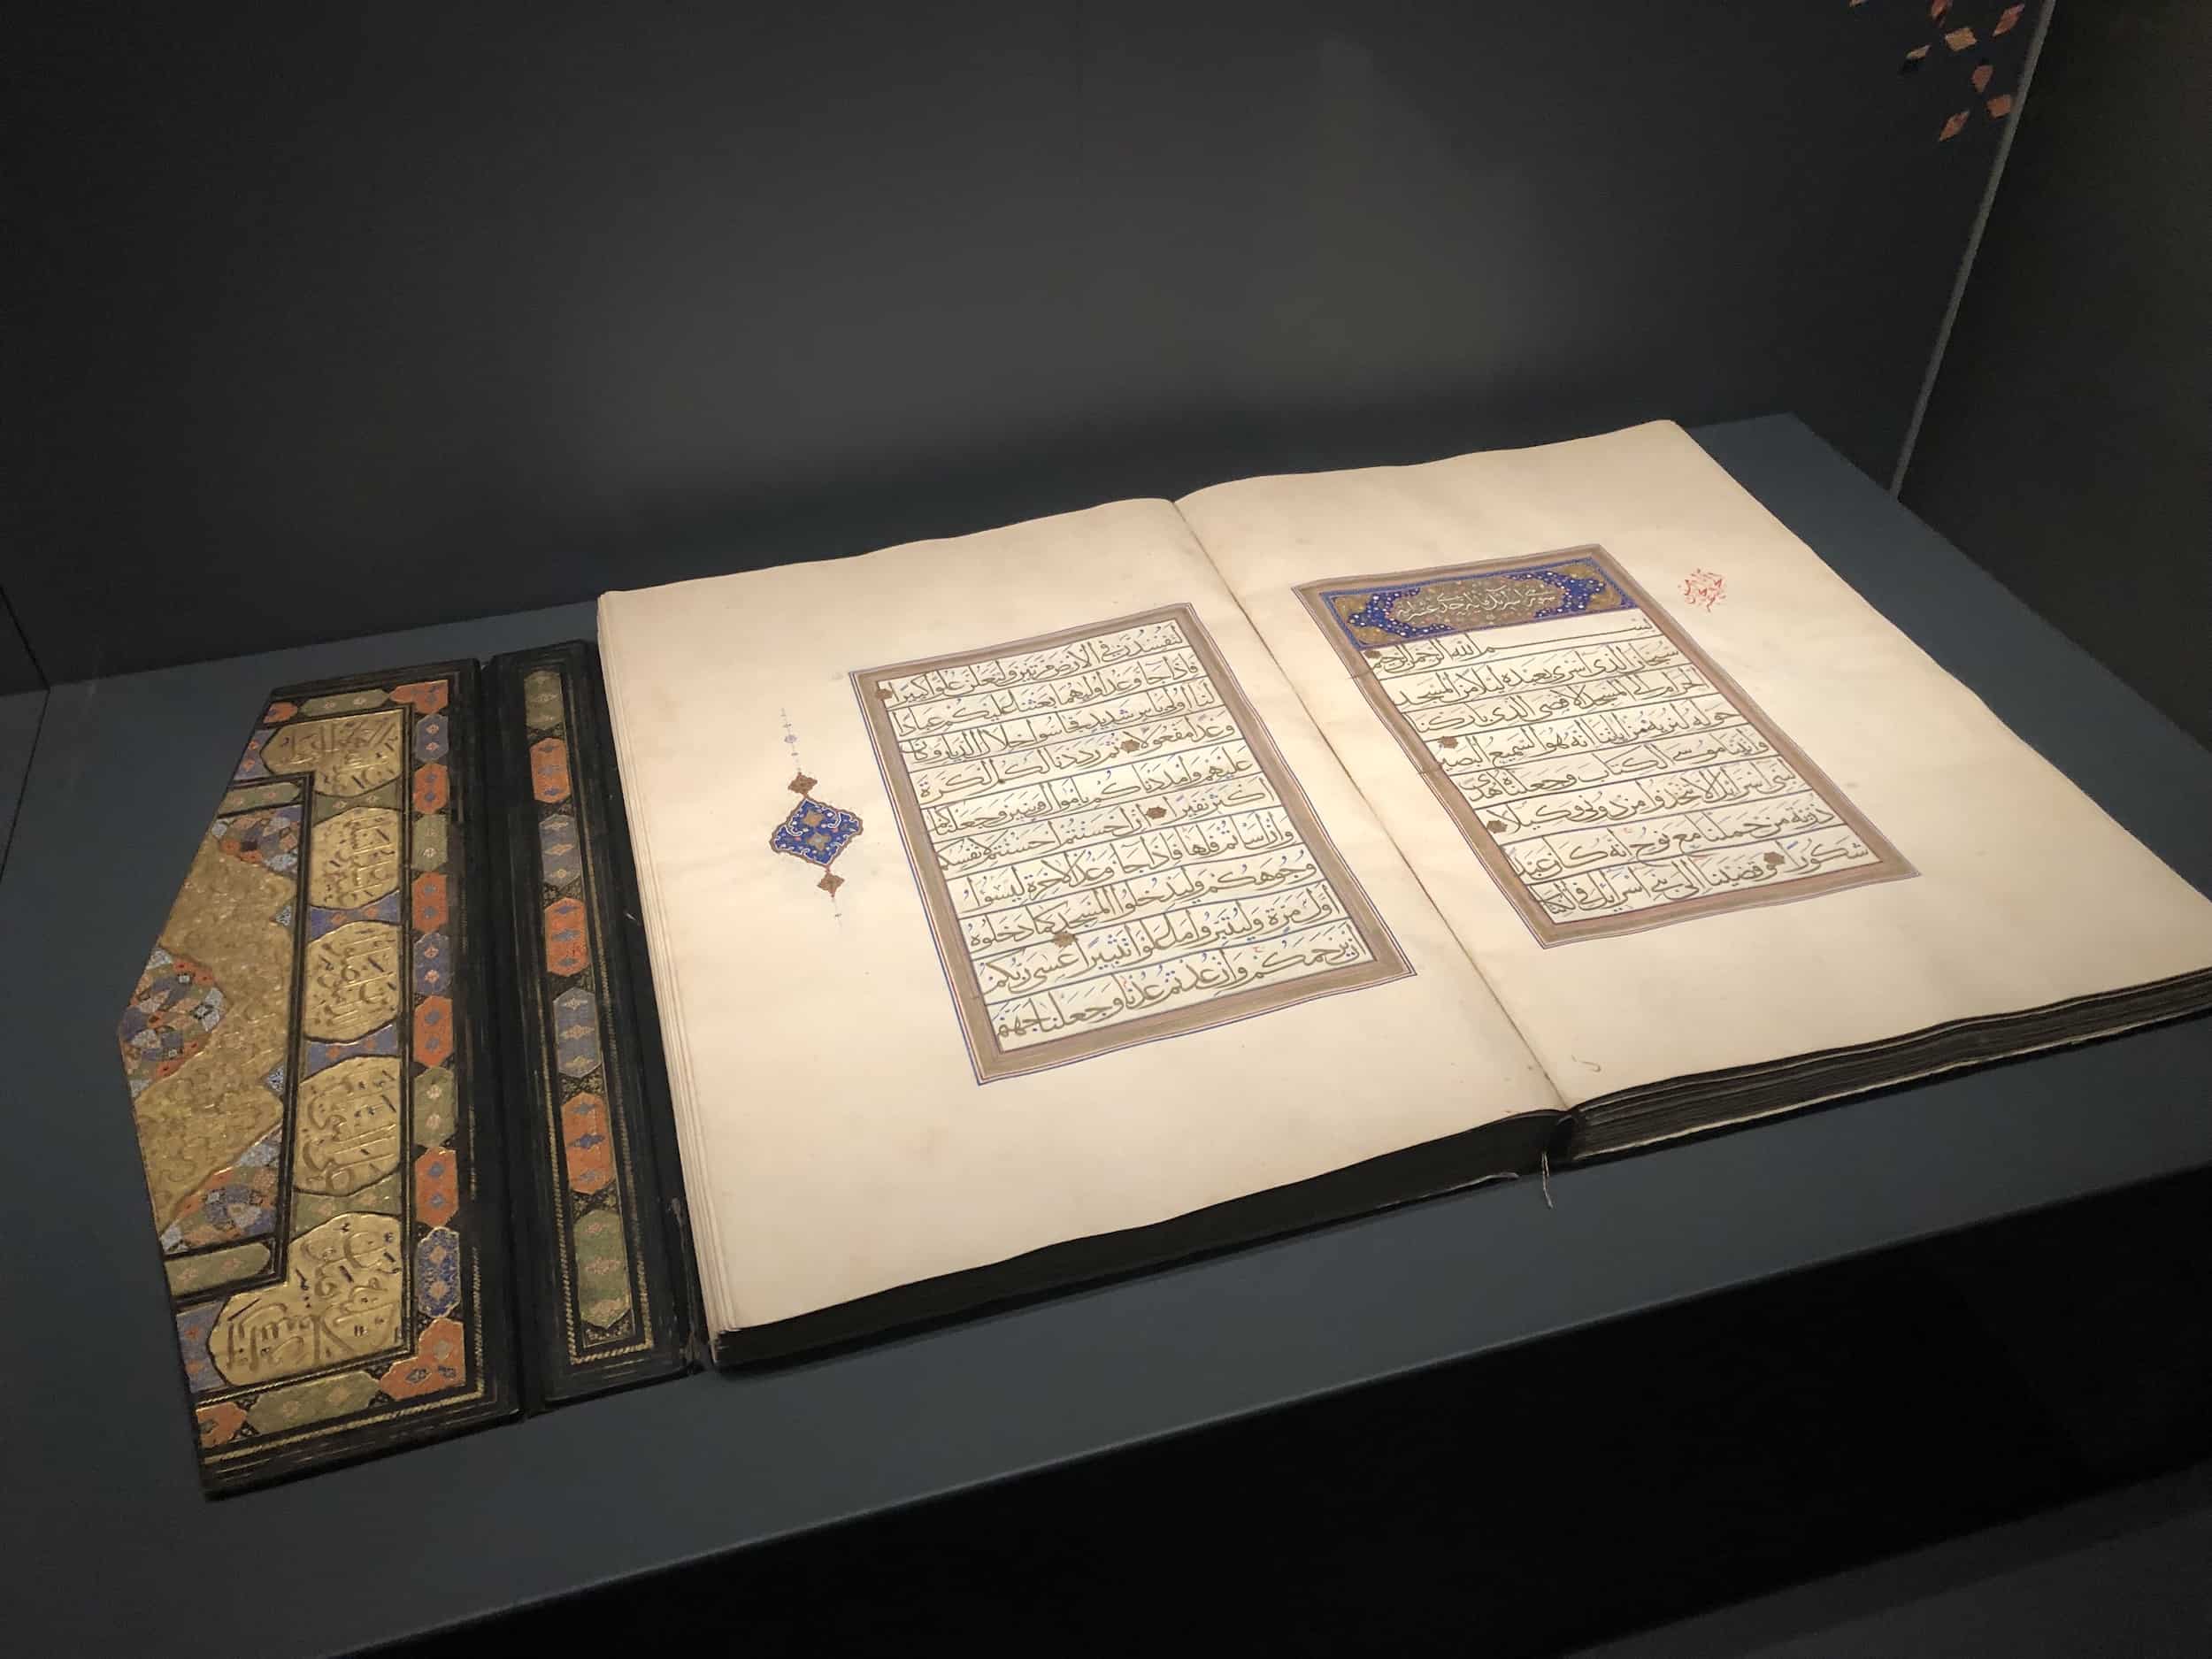 Quran from the Safavid period